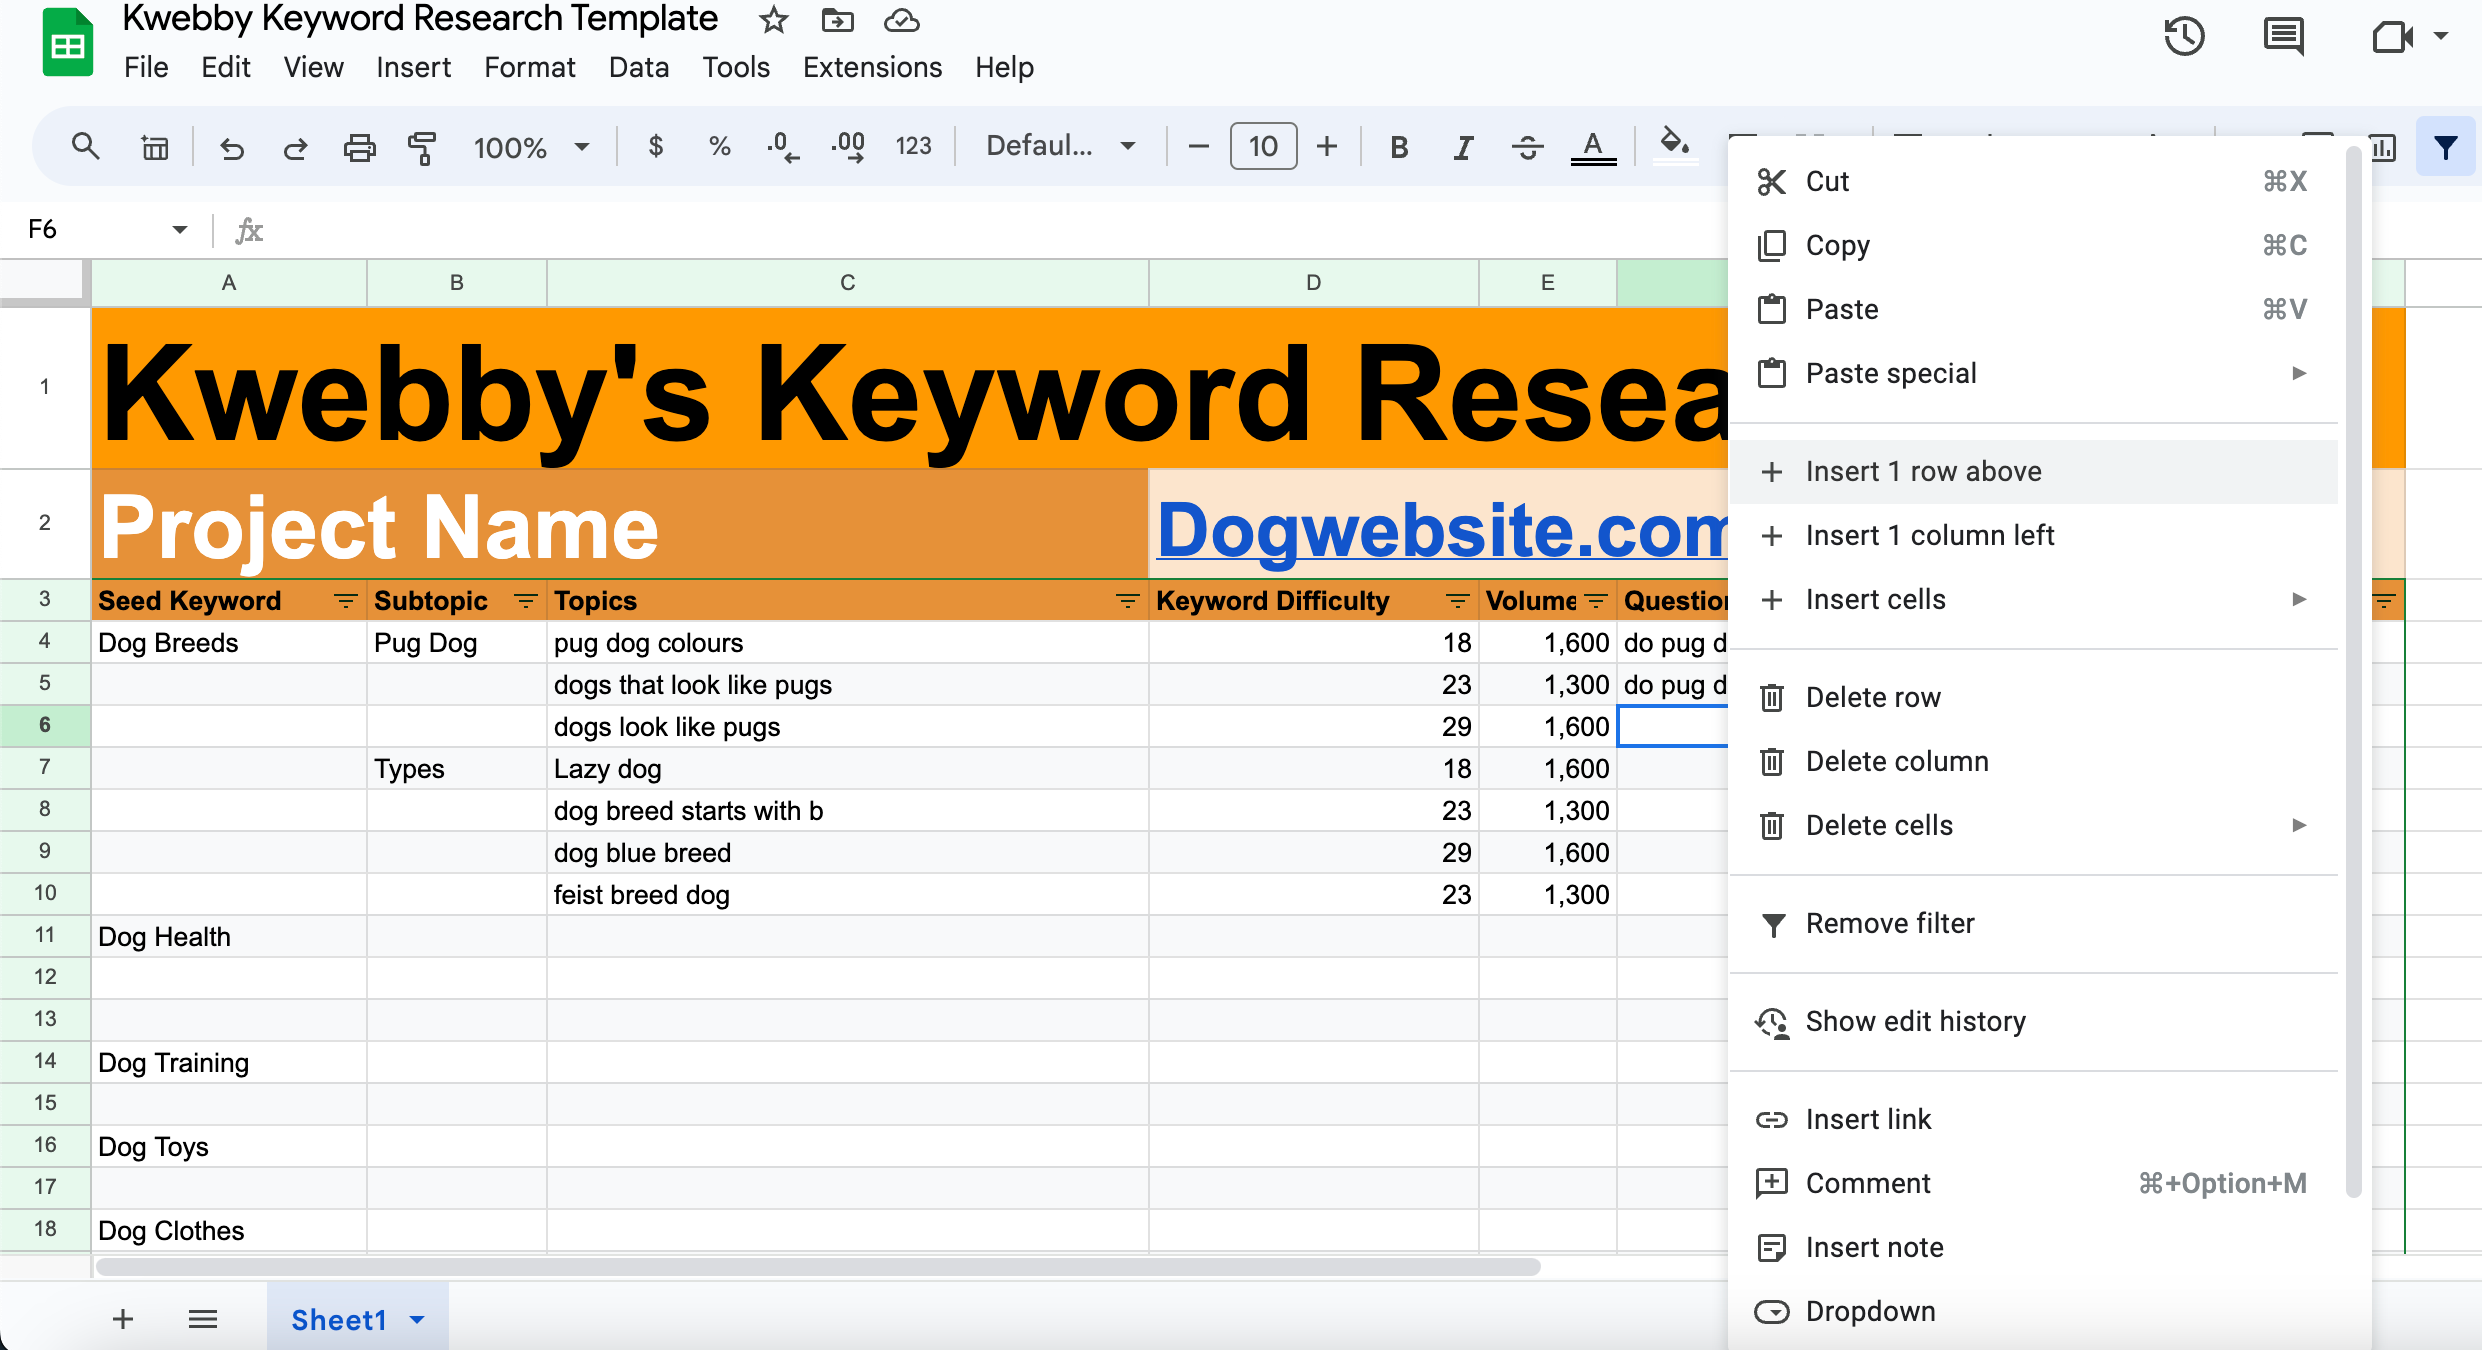 How to do Keyword Research for New Sites to Get 100k Traffic (Template Inside) 12